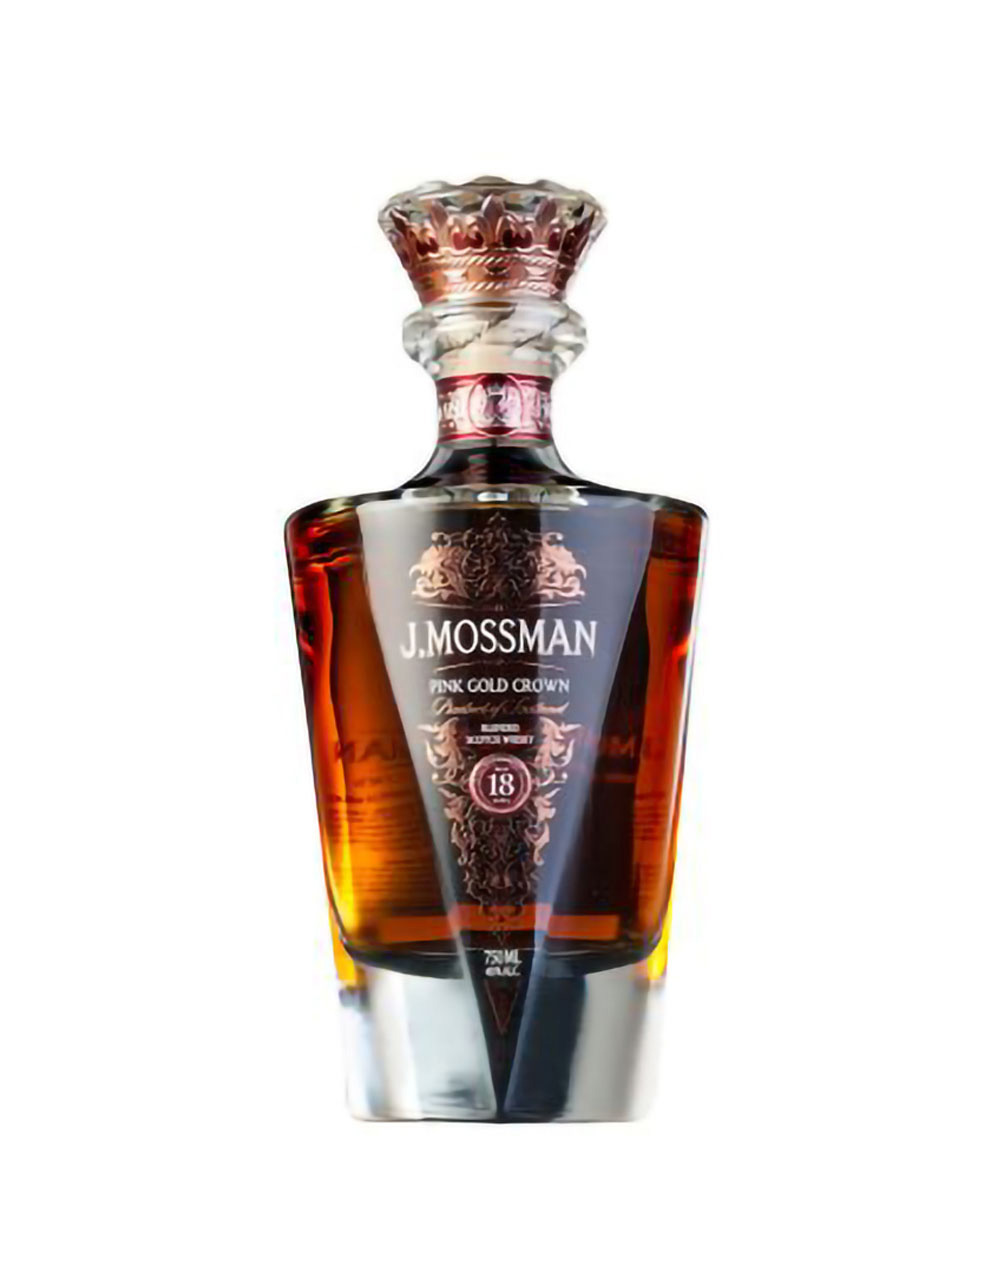 J. Mossman 18 Year Old Pink Gold Crown Blended Scotch Whisky